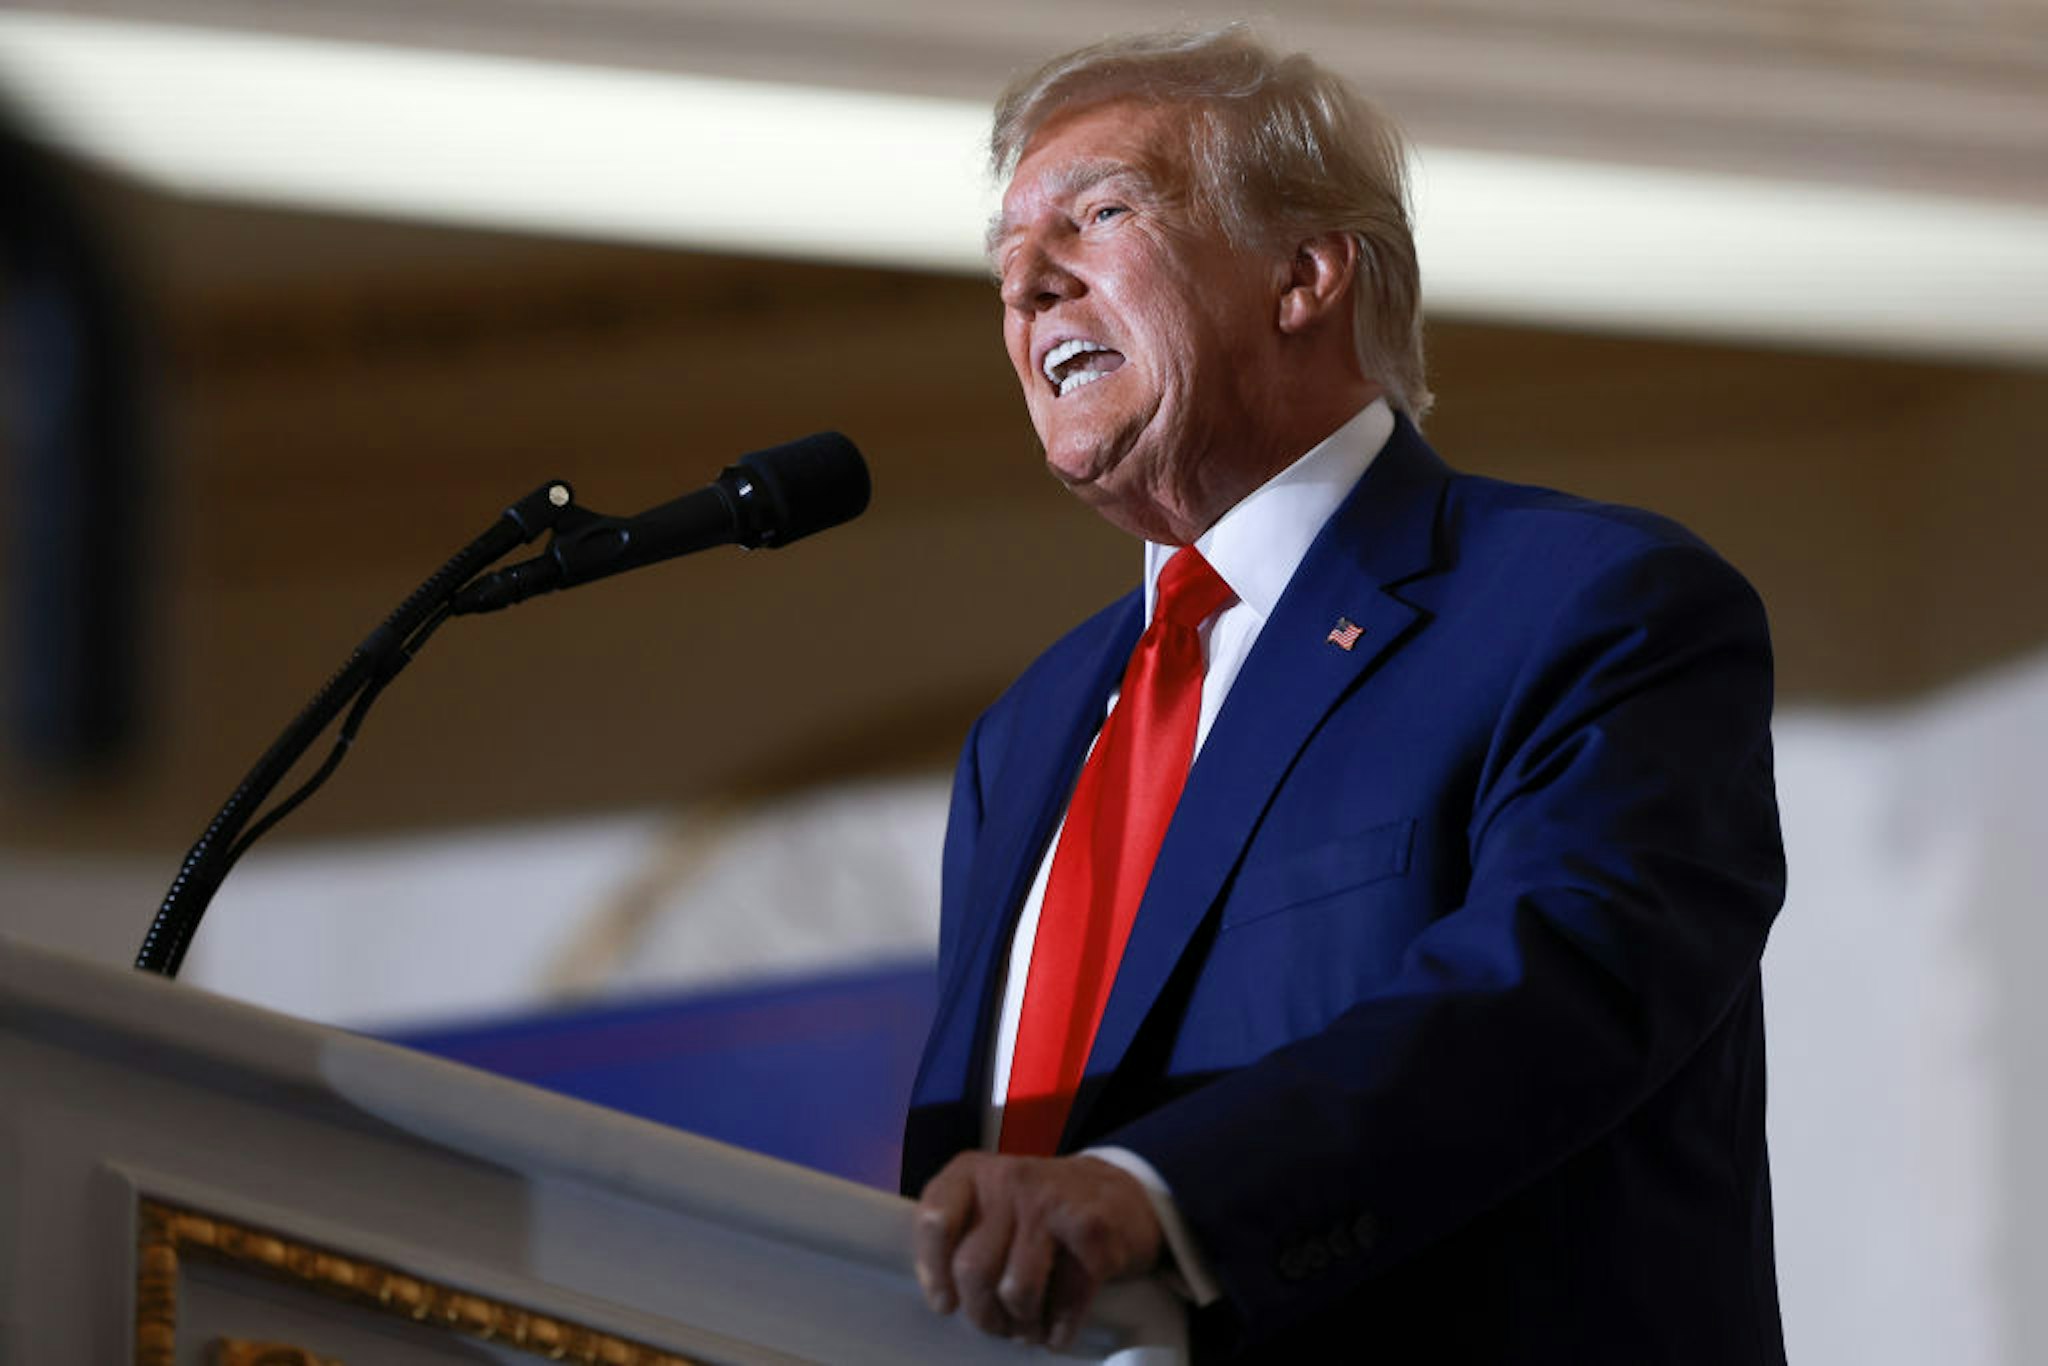 WEST PALM BEACH, FLORIDA - APRIL 04: Former U.S. President Donald Trump speaks during an event at the Mar-a-Lago Club April 4, 2023 in West Palm Beach, Florida. Trump pleaded not guilty in a Manhattan courtroom today to 34 counts related to money paid to adult film star Stormy Daniels in 2016, the first criminal charges for any former U.S. president. (Photo by Joe Raedle/Getty Images)